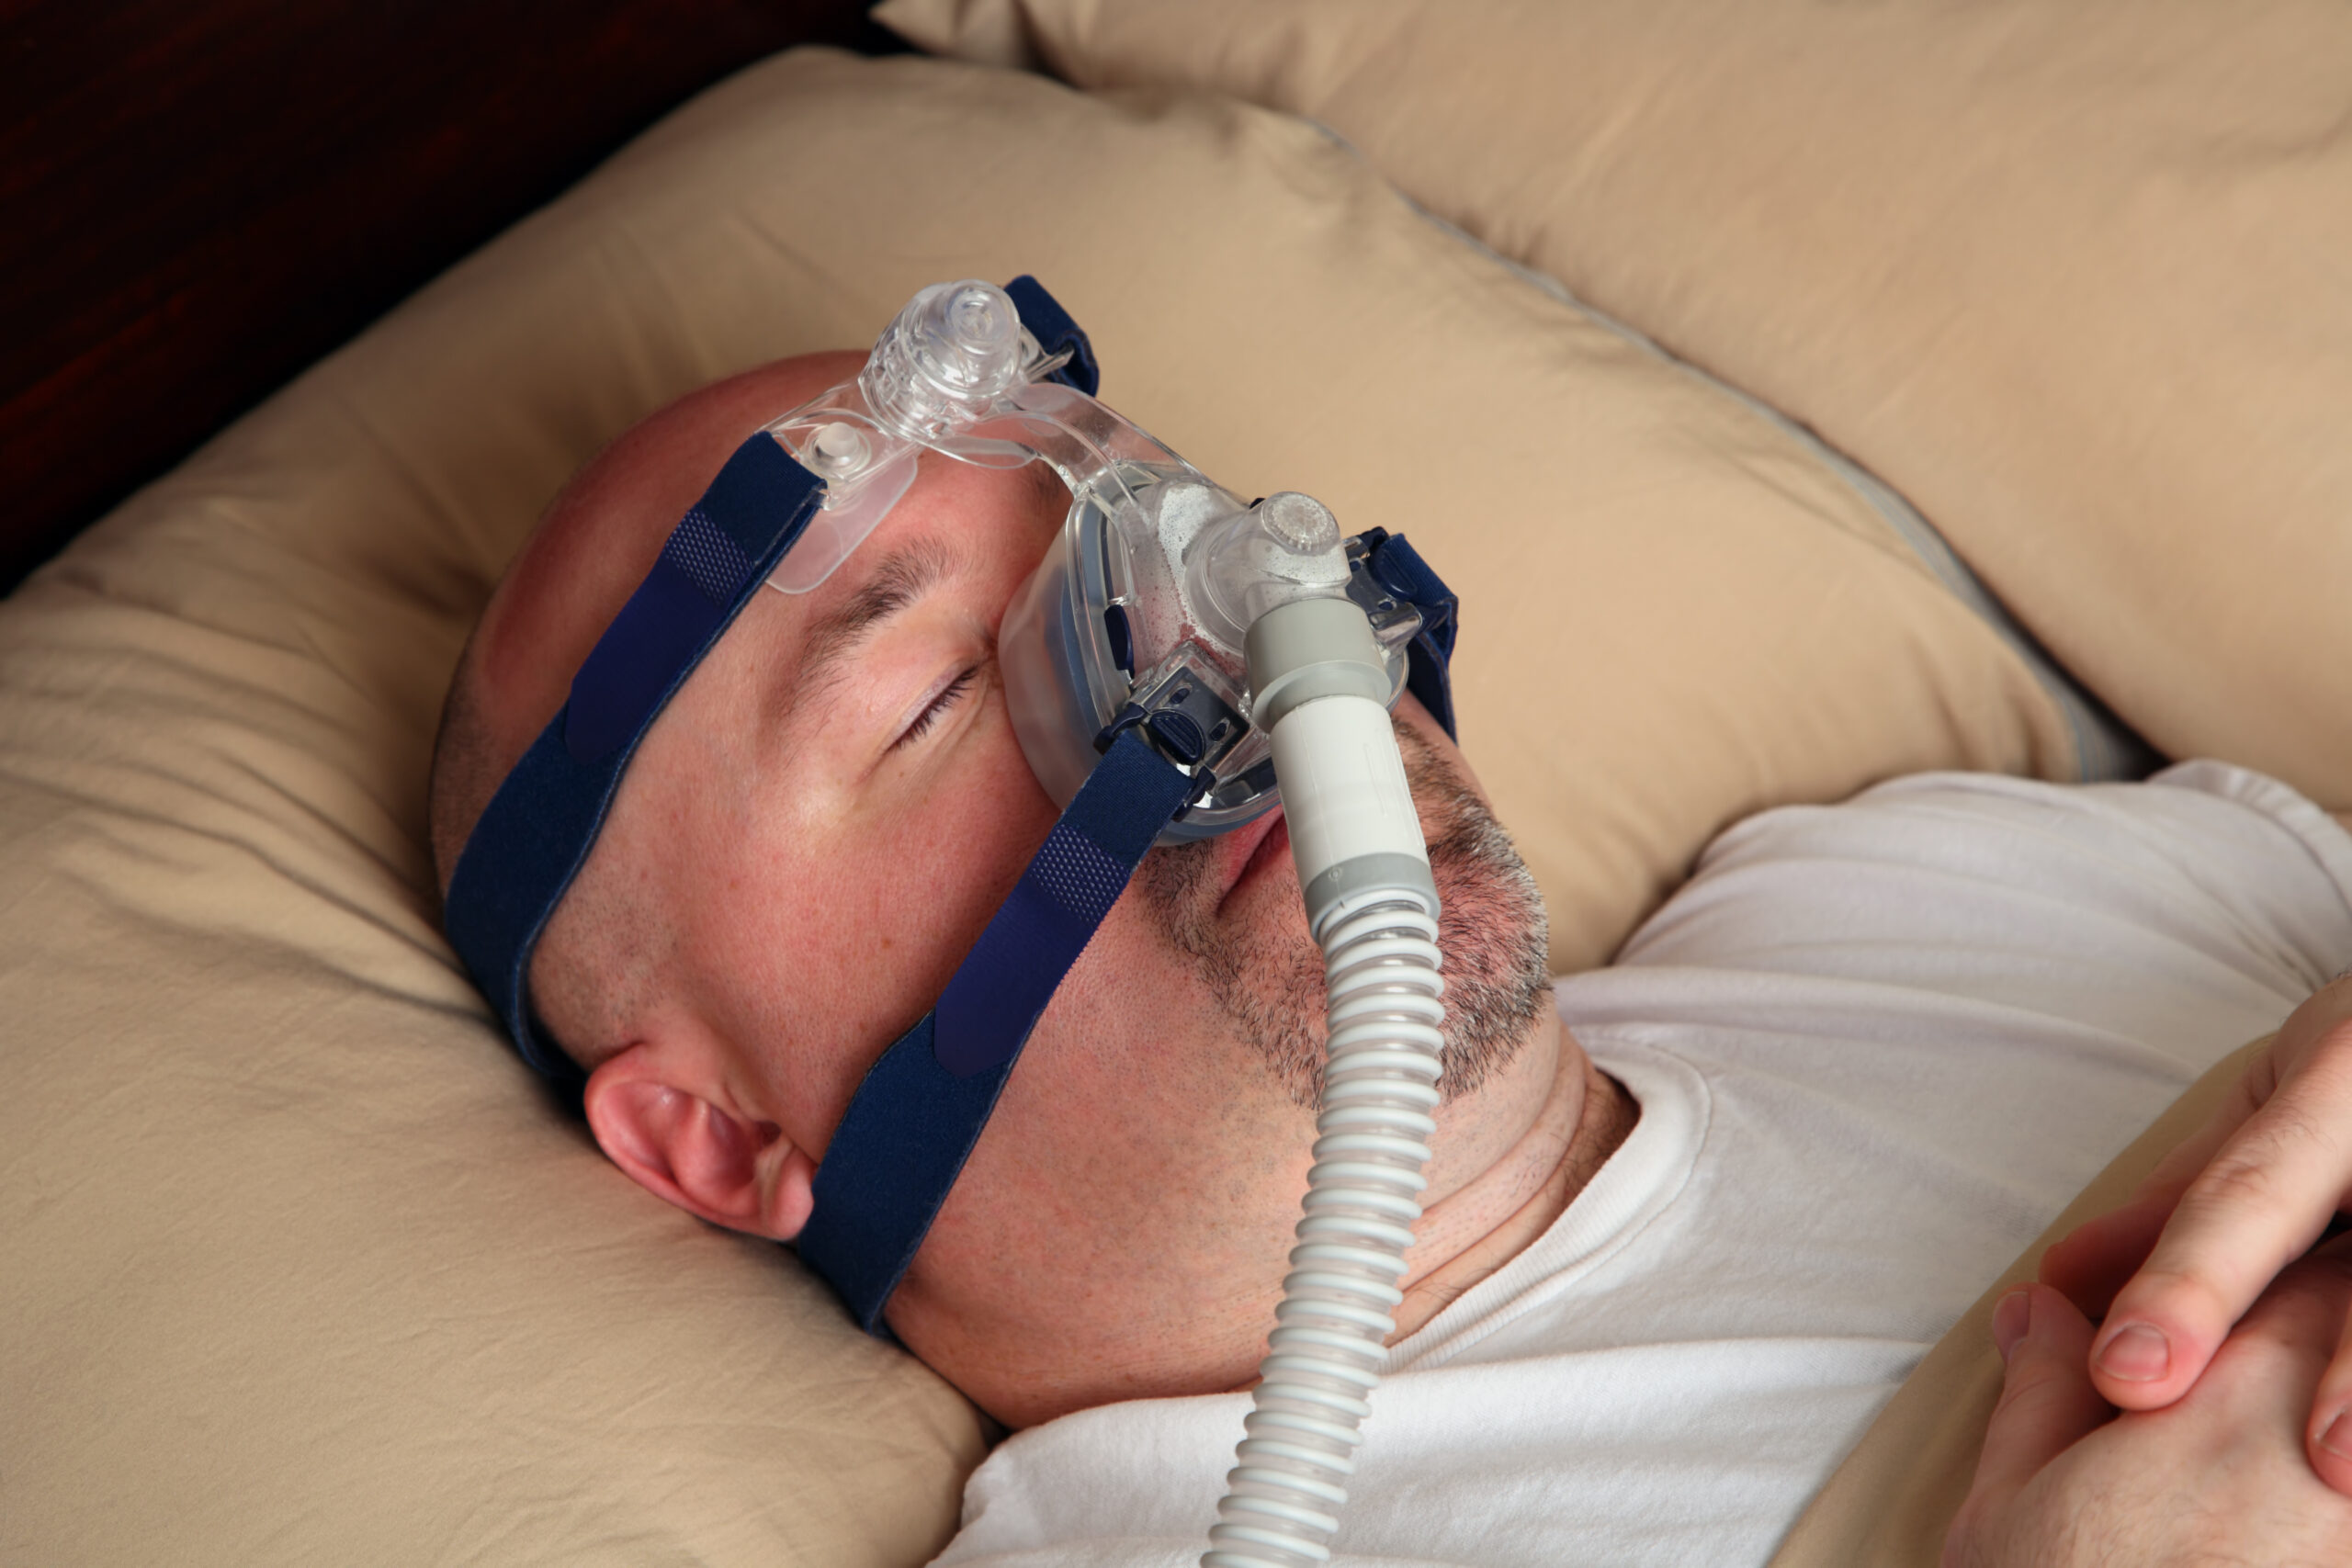 Obese patient with obstructive sleep apnea using CPAP machine will get benefit by medical weight loss.